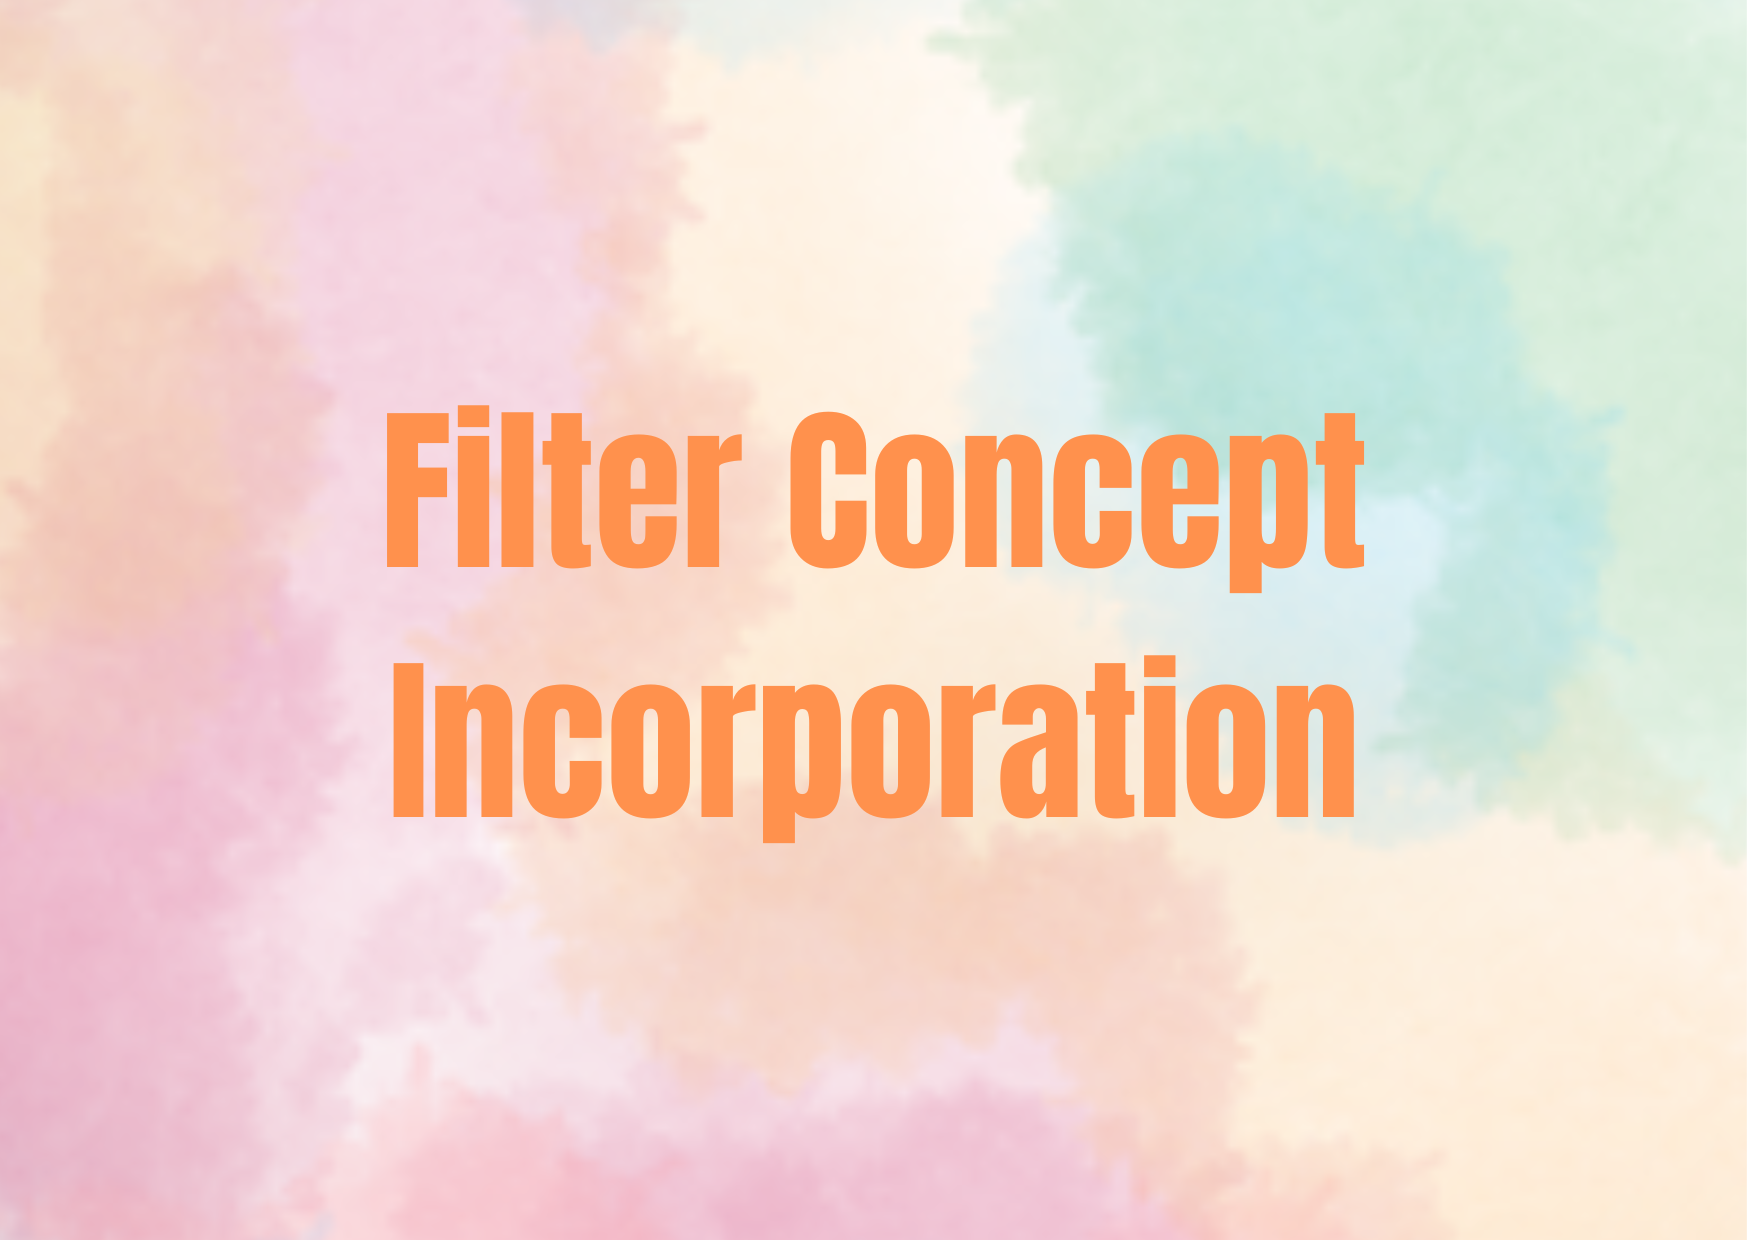 Filter Concept Incorporation,   